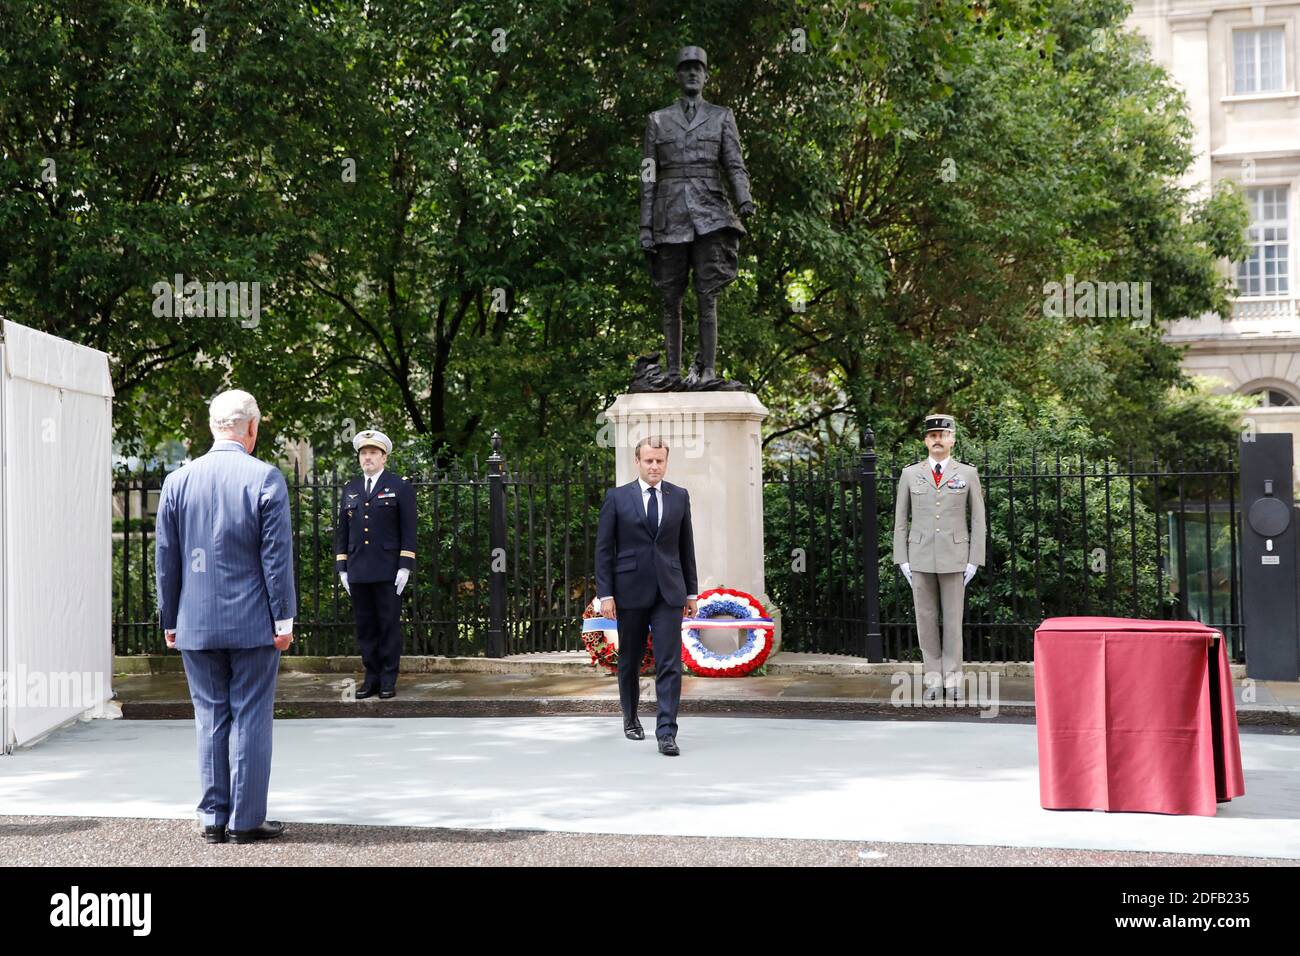 Britain's Prince Charles, Prince of Wales (L) and French President Emmanuel Macron (C) lay wreaths at the statue of former French president Charles de Gaulle at Carlton Gardens in central London on June 18, 2020 during a visit to mark the anniversary of former de Gaulle's appeal to French people to resist the Nazi occupation. - Macron visited London on June 18 to commemorate the 80th anniversary of former French president Charles de Gaulle's appeal to French people to resist the Nazi occupation during World War II. Photo by Tolga AKMEN/Pool/ABACAPRESS.COM Stock Photo